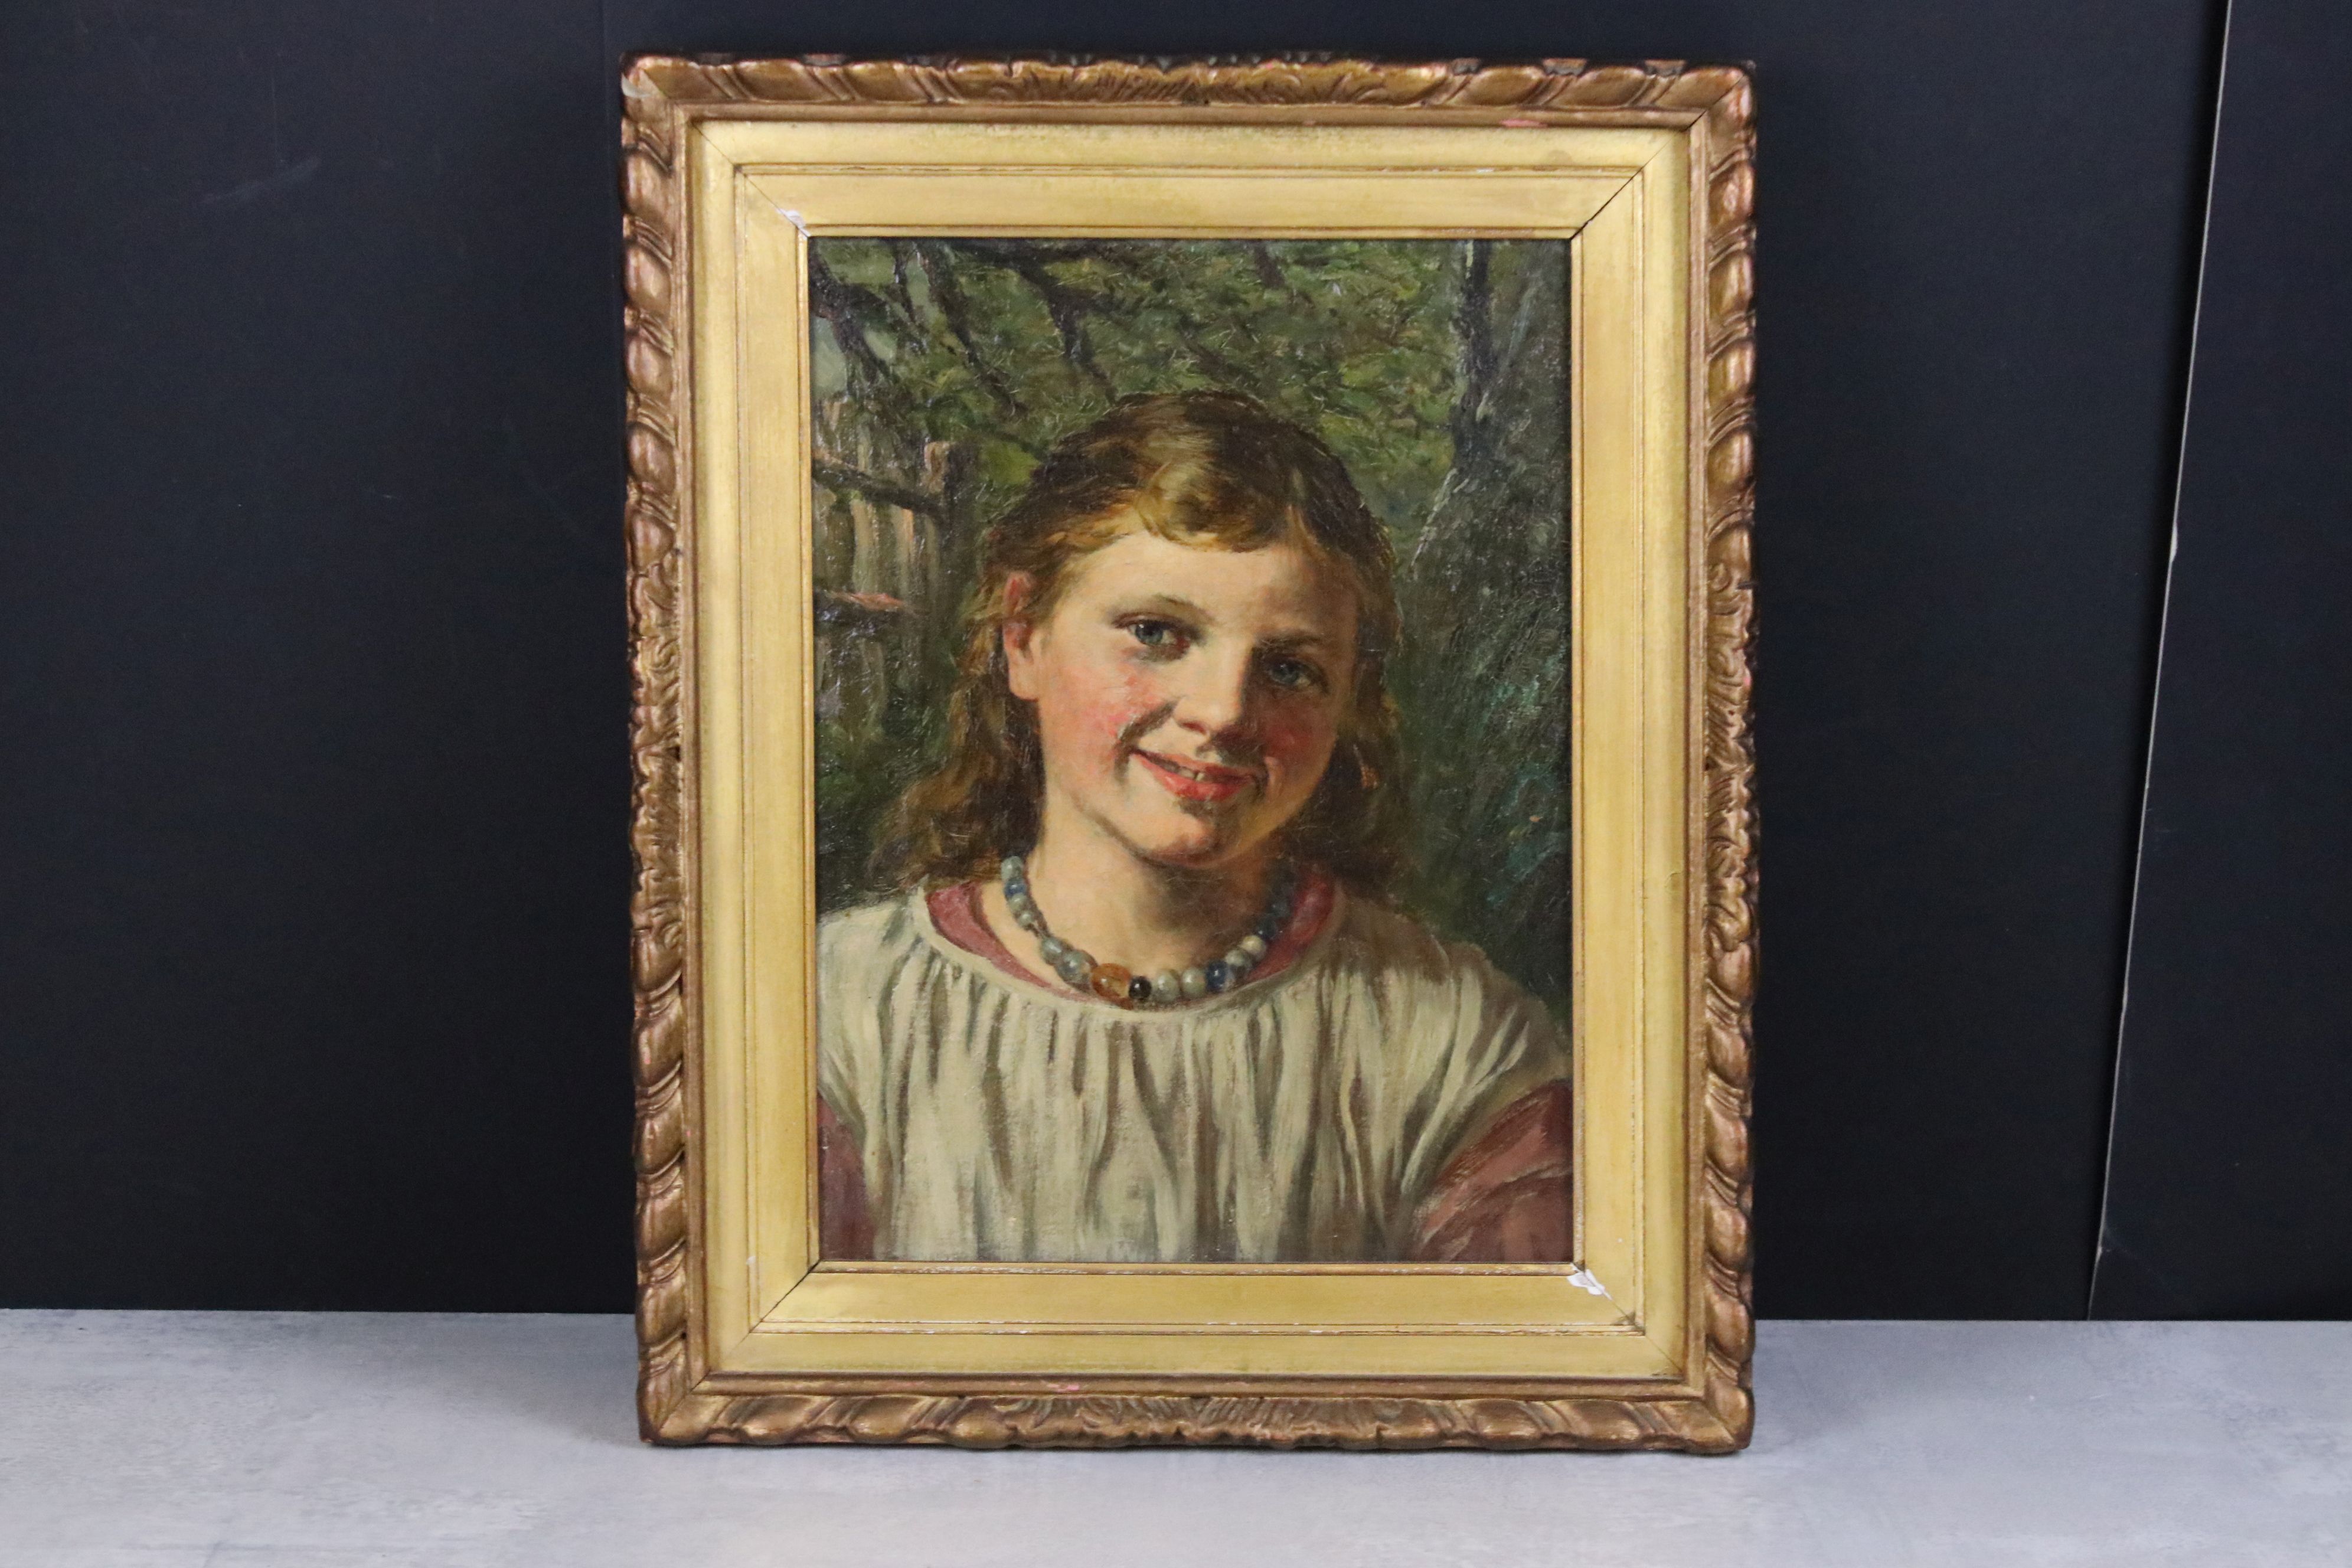 Late 19th / Early 20th century Oil Painting Portrait of a Young Girl, 30cm x 22cm, gilt framed